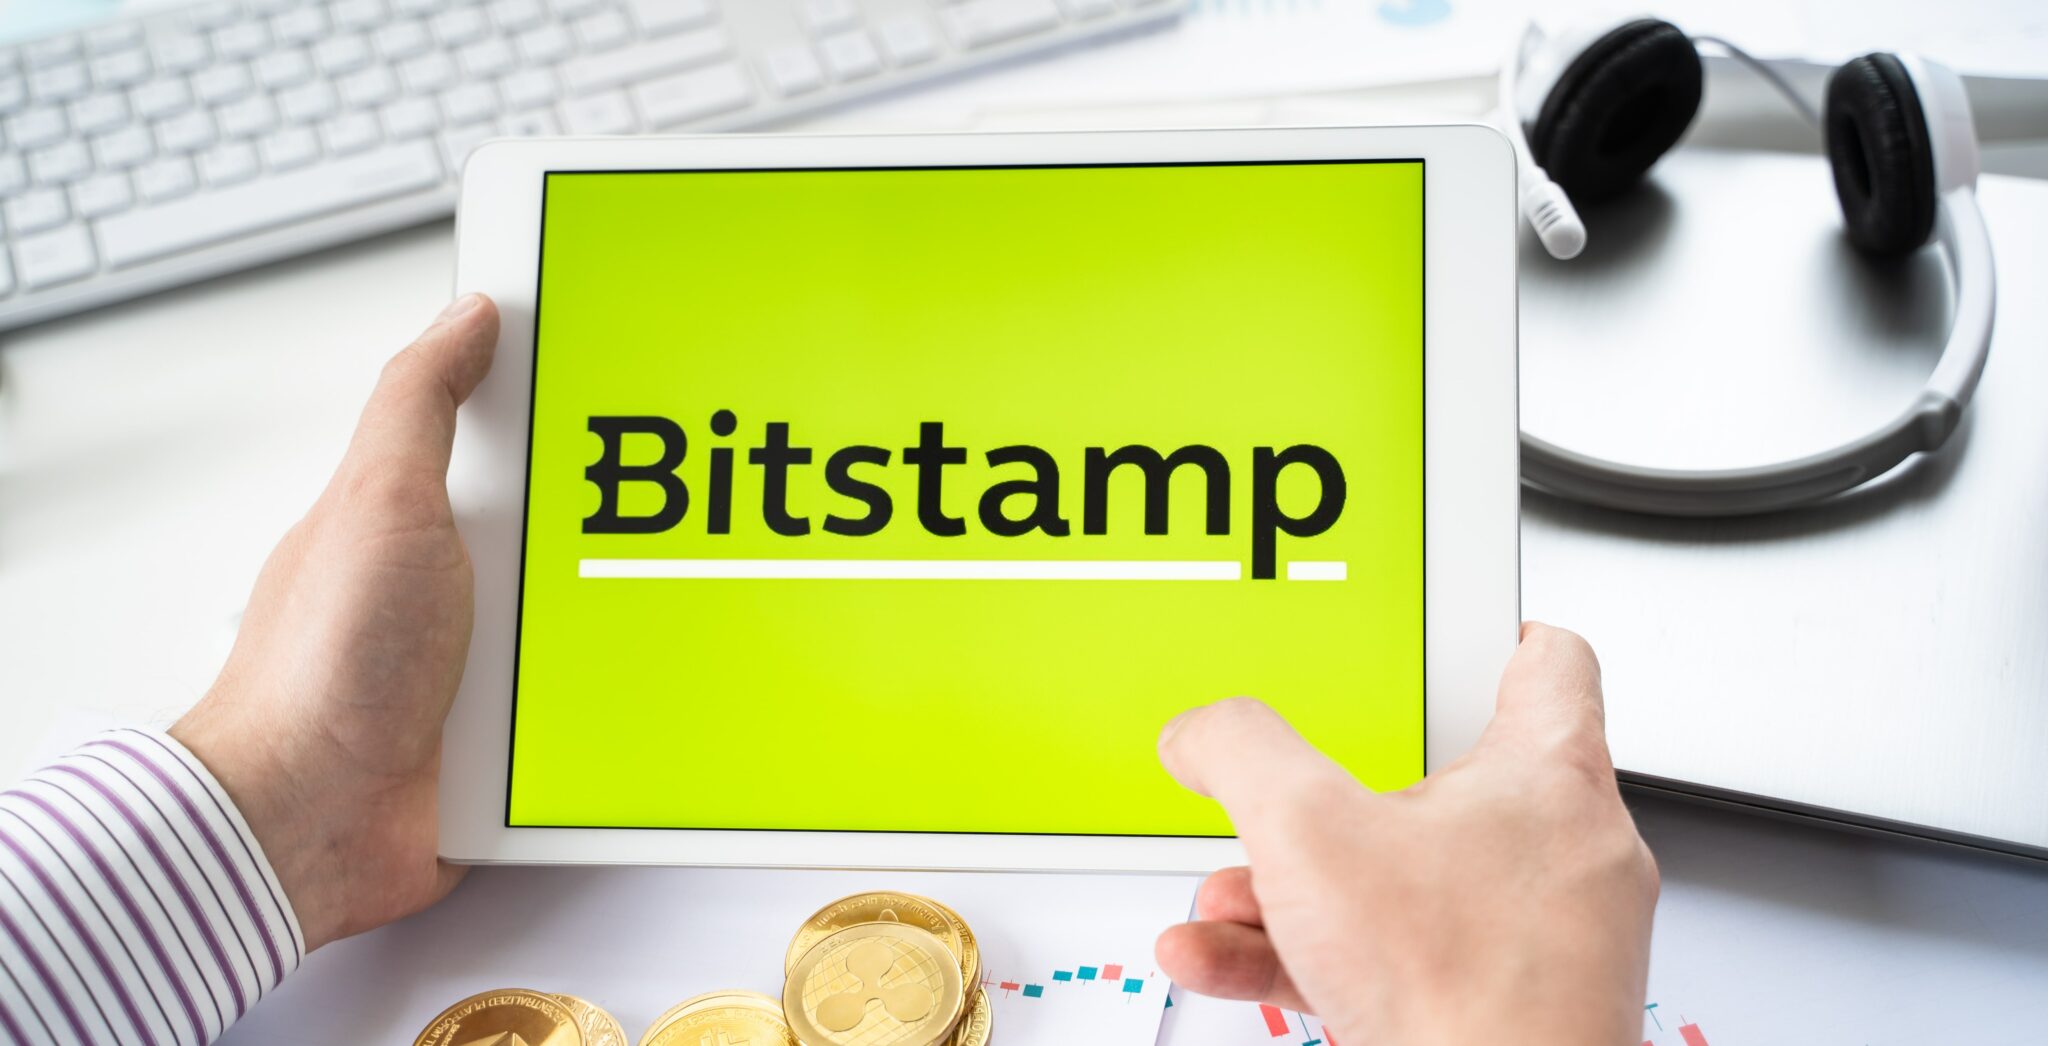 Bitstamp Survey: 80% of Institutional Investors Expect Crypto to Overshadow Traditional Investment Assets